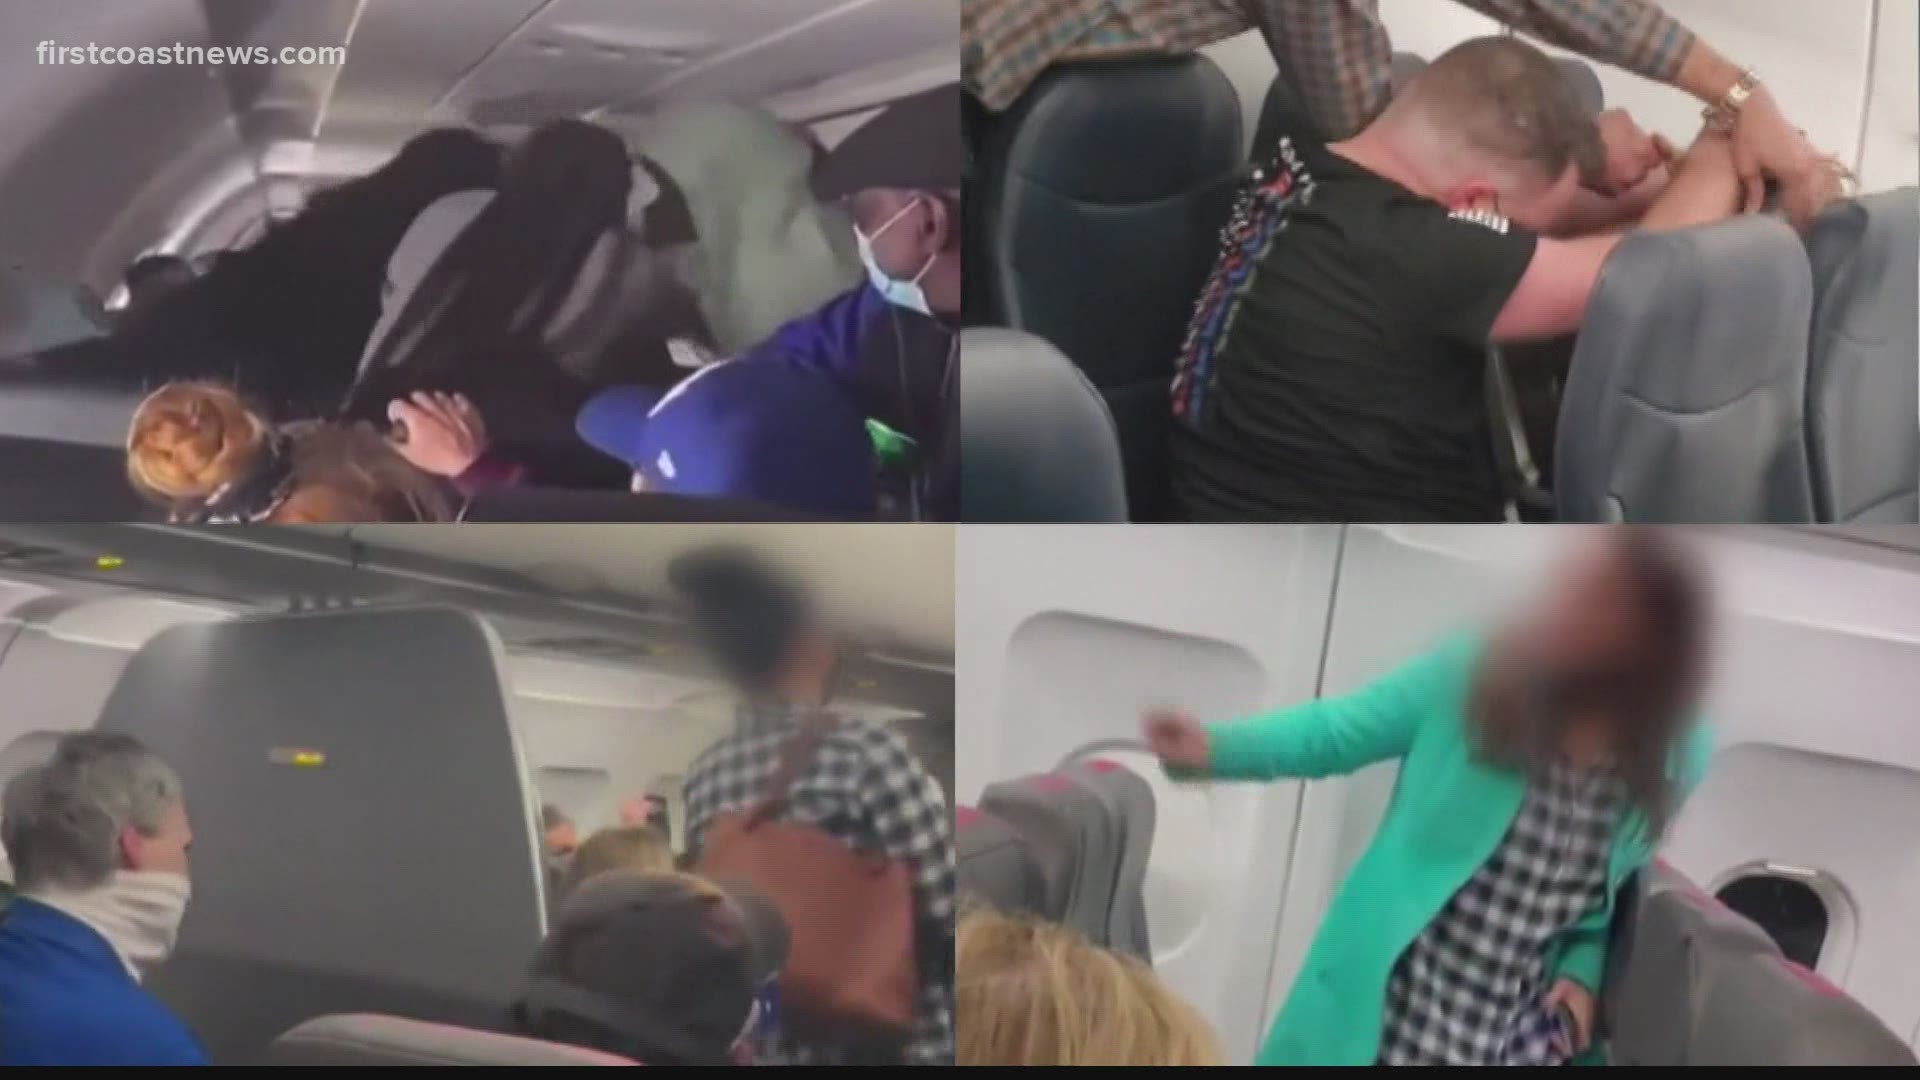 Since Jan. 1, airlines have reported more than 3,200 cases of unruly passengers to aviation authorities.